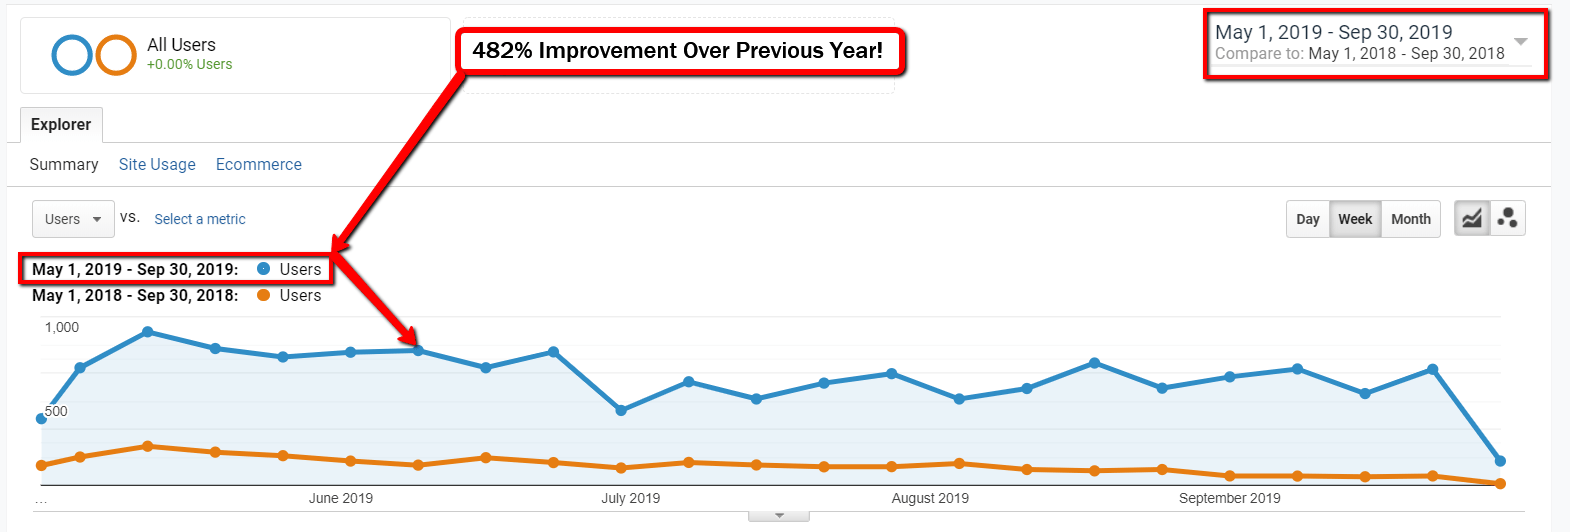 482% Improvement Over Previous Year!